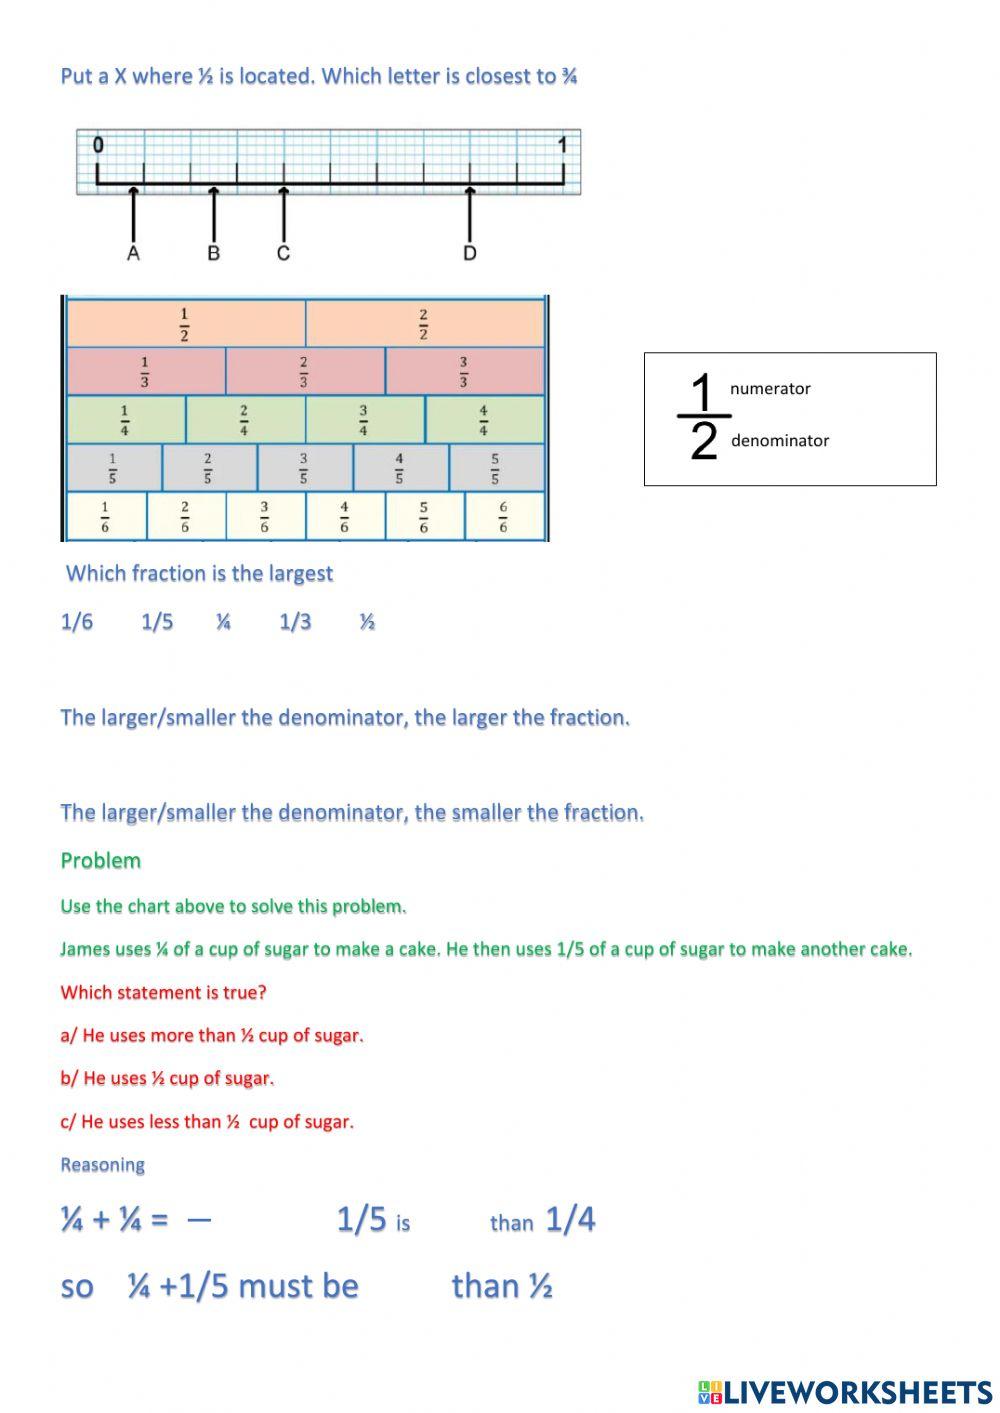 Fractions Revision Set 1